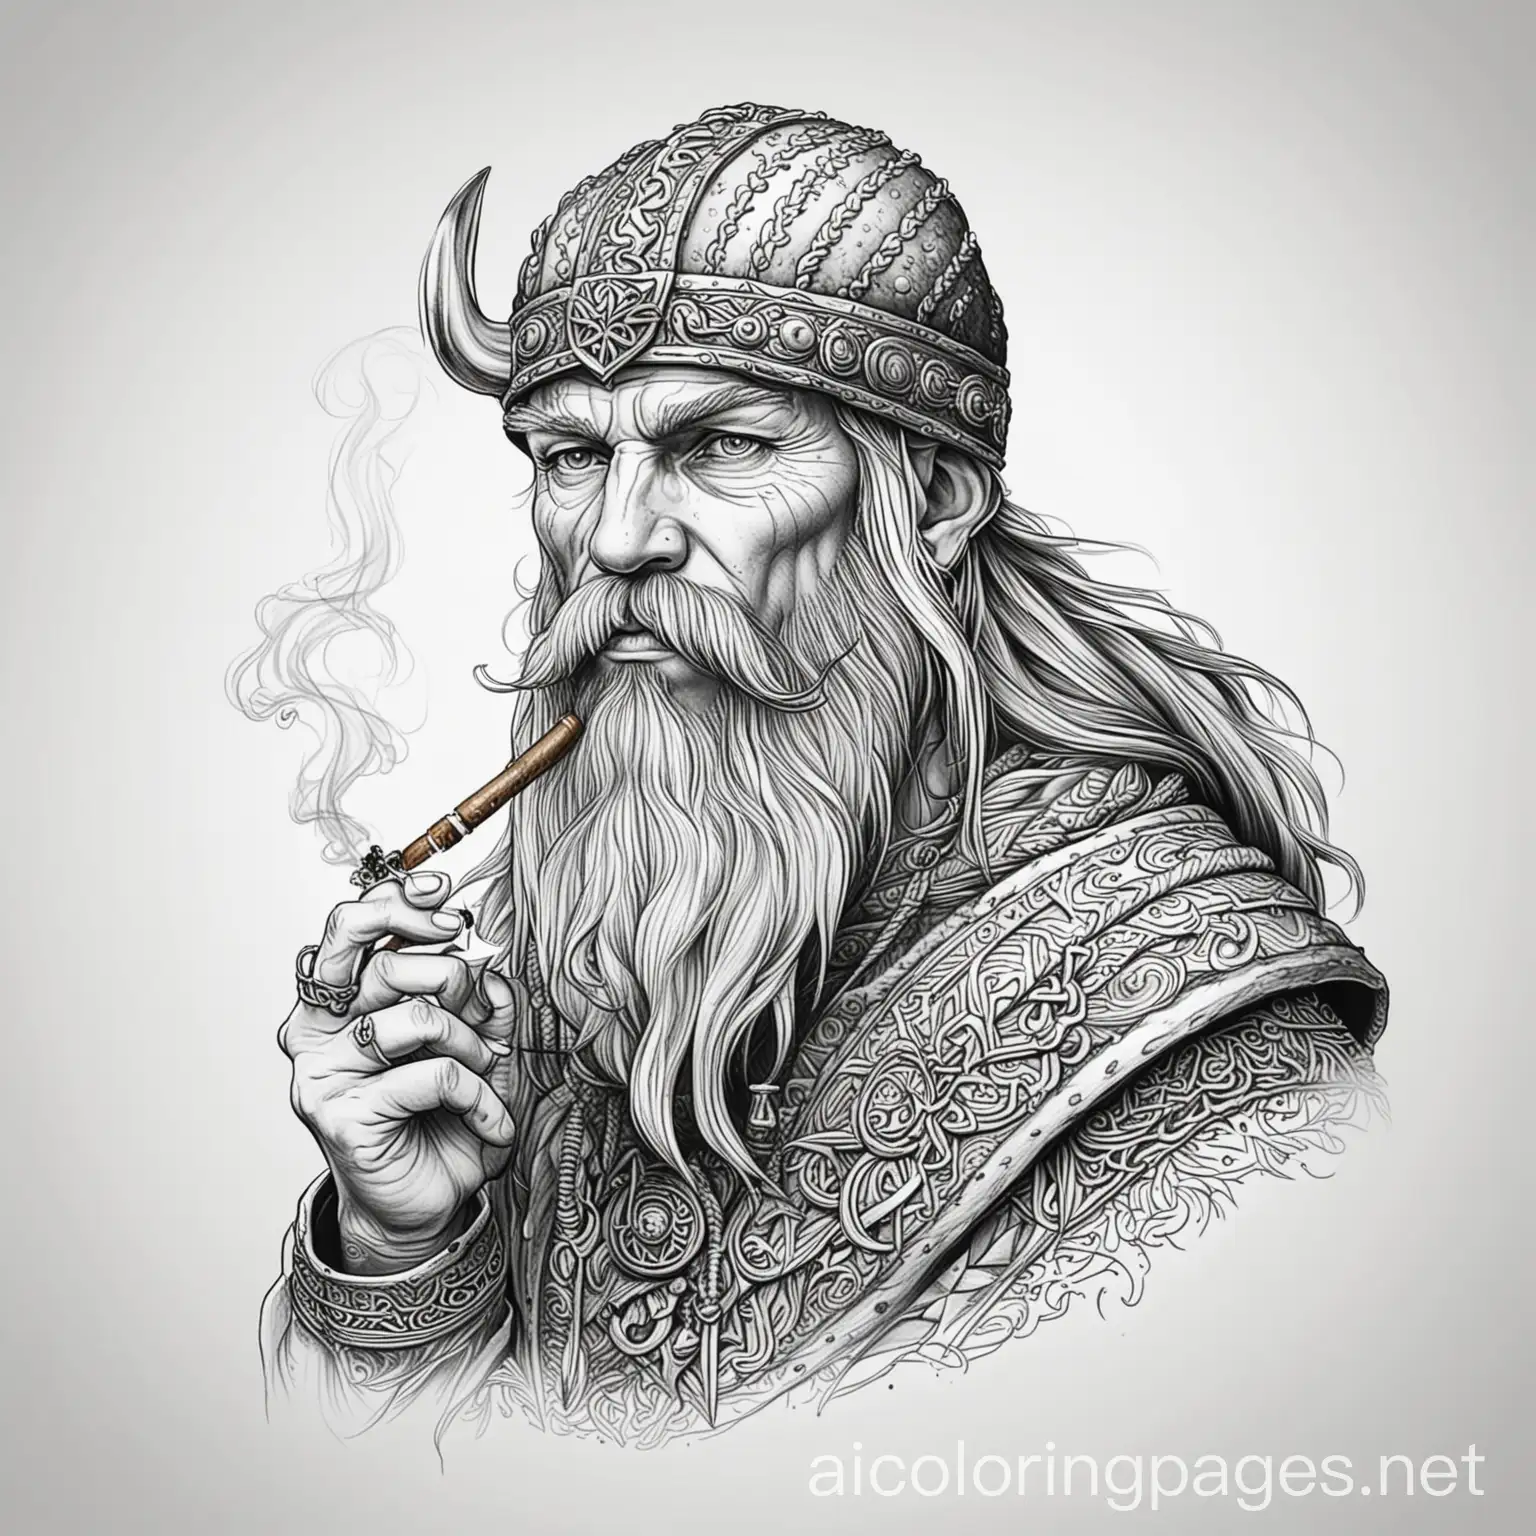 viking smoking cannabis, Coloring Page, black and white, line art, white background, Simplicity, Ample White Space. The background of the coloring page is plain white to make it easy for young children to color within the lines. The outlines of all the subjects are easy to distinguish, making it simple for kids to color without too much difficulty